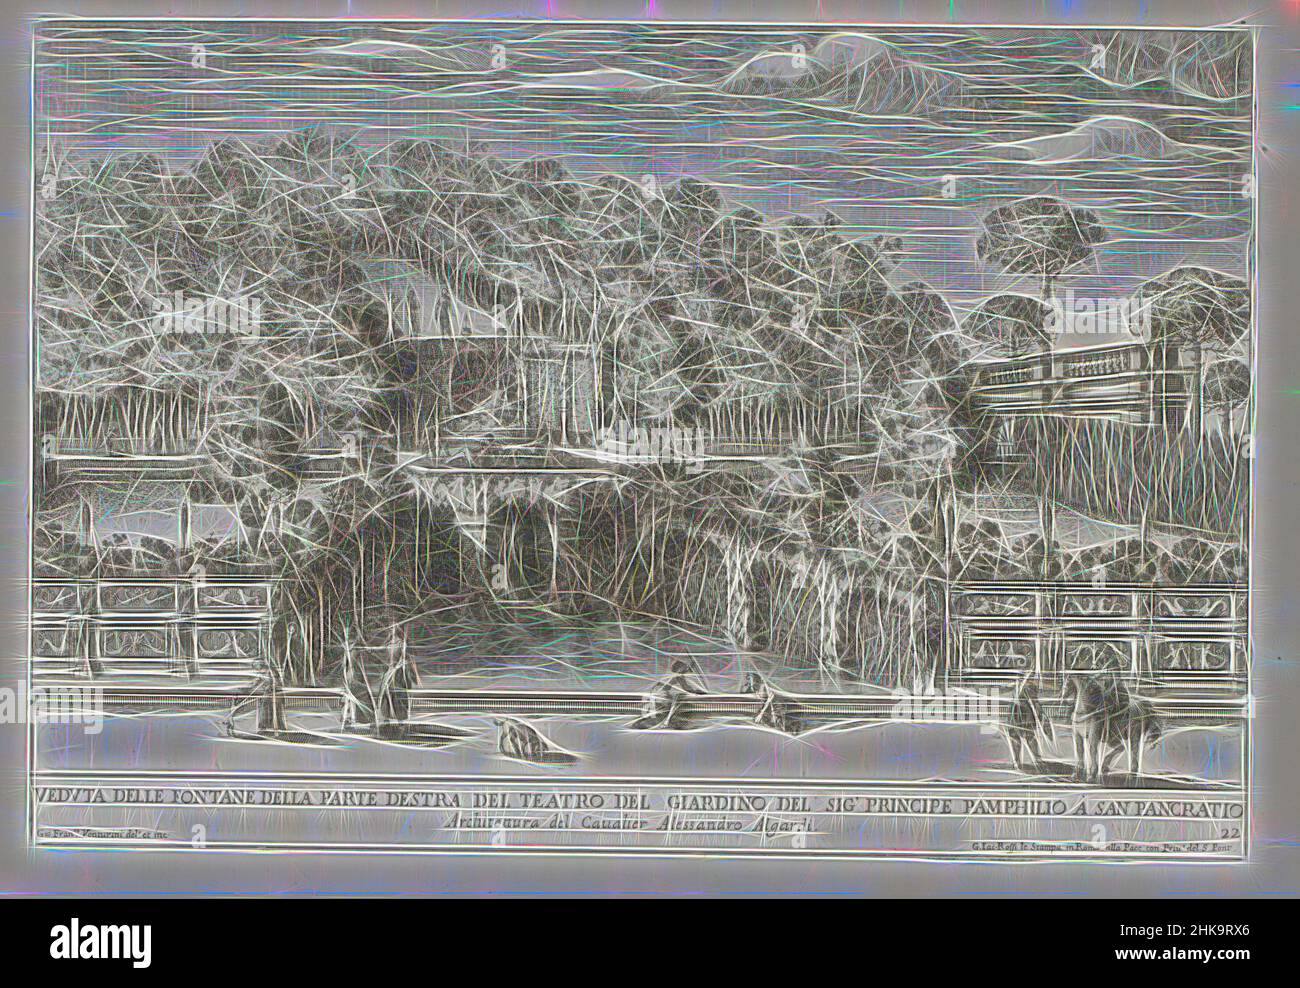 Inspired by Fountain in the gardens of Villa Doria Pamphilj in Rome, Veduta delle fontane della parte destra del teatro del giardino (...), Le fontane ne palazzi e ne giardini di Roma, Fountains in the palaces and gardens of Rome, Numbered lower right: 22. The print is part of an album., print maker, Reimagined by Artotop. Classic art reinvented with a modern twist. Design of warm cheerful glowing of brightness and light ray radiance. Photography inspired by surrealism and futurism, embracing dynamic energy of modern technology, movement, speed and revolutionize culture Stock Photo